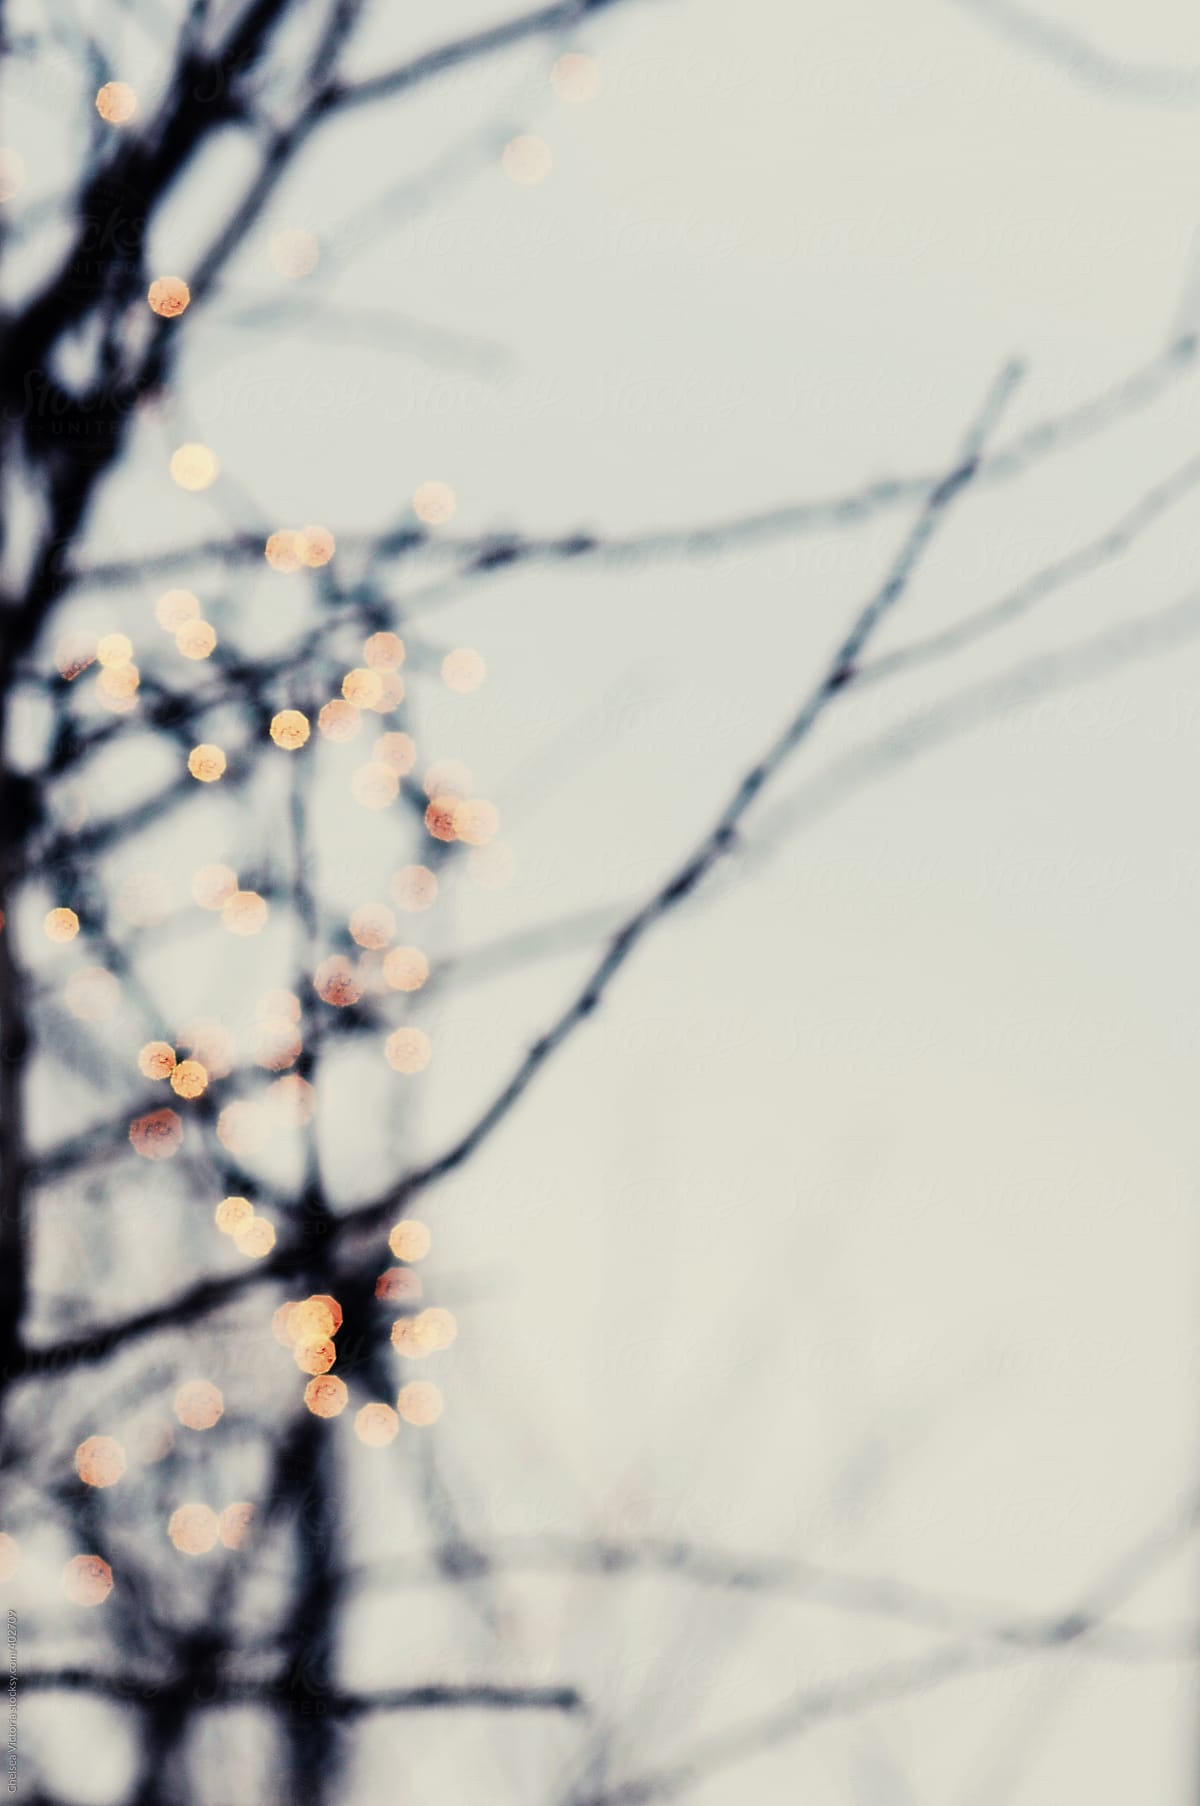 Out Of Focus Christmas Lights And Bare Branches